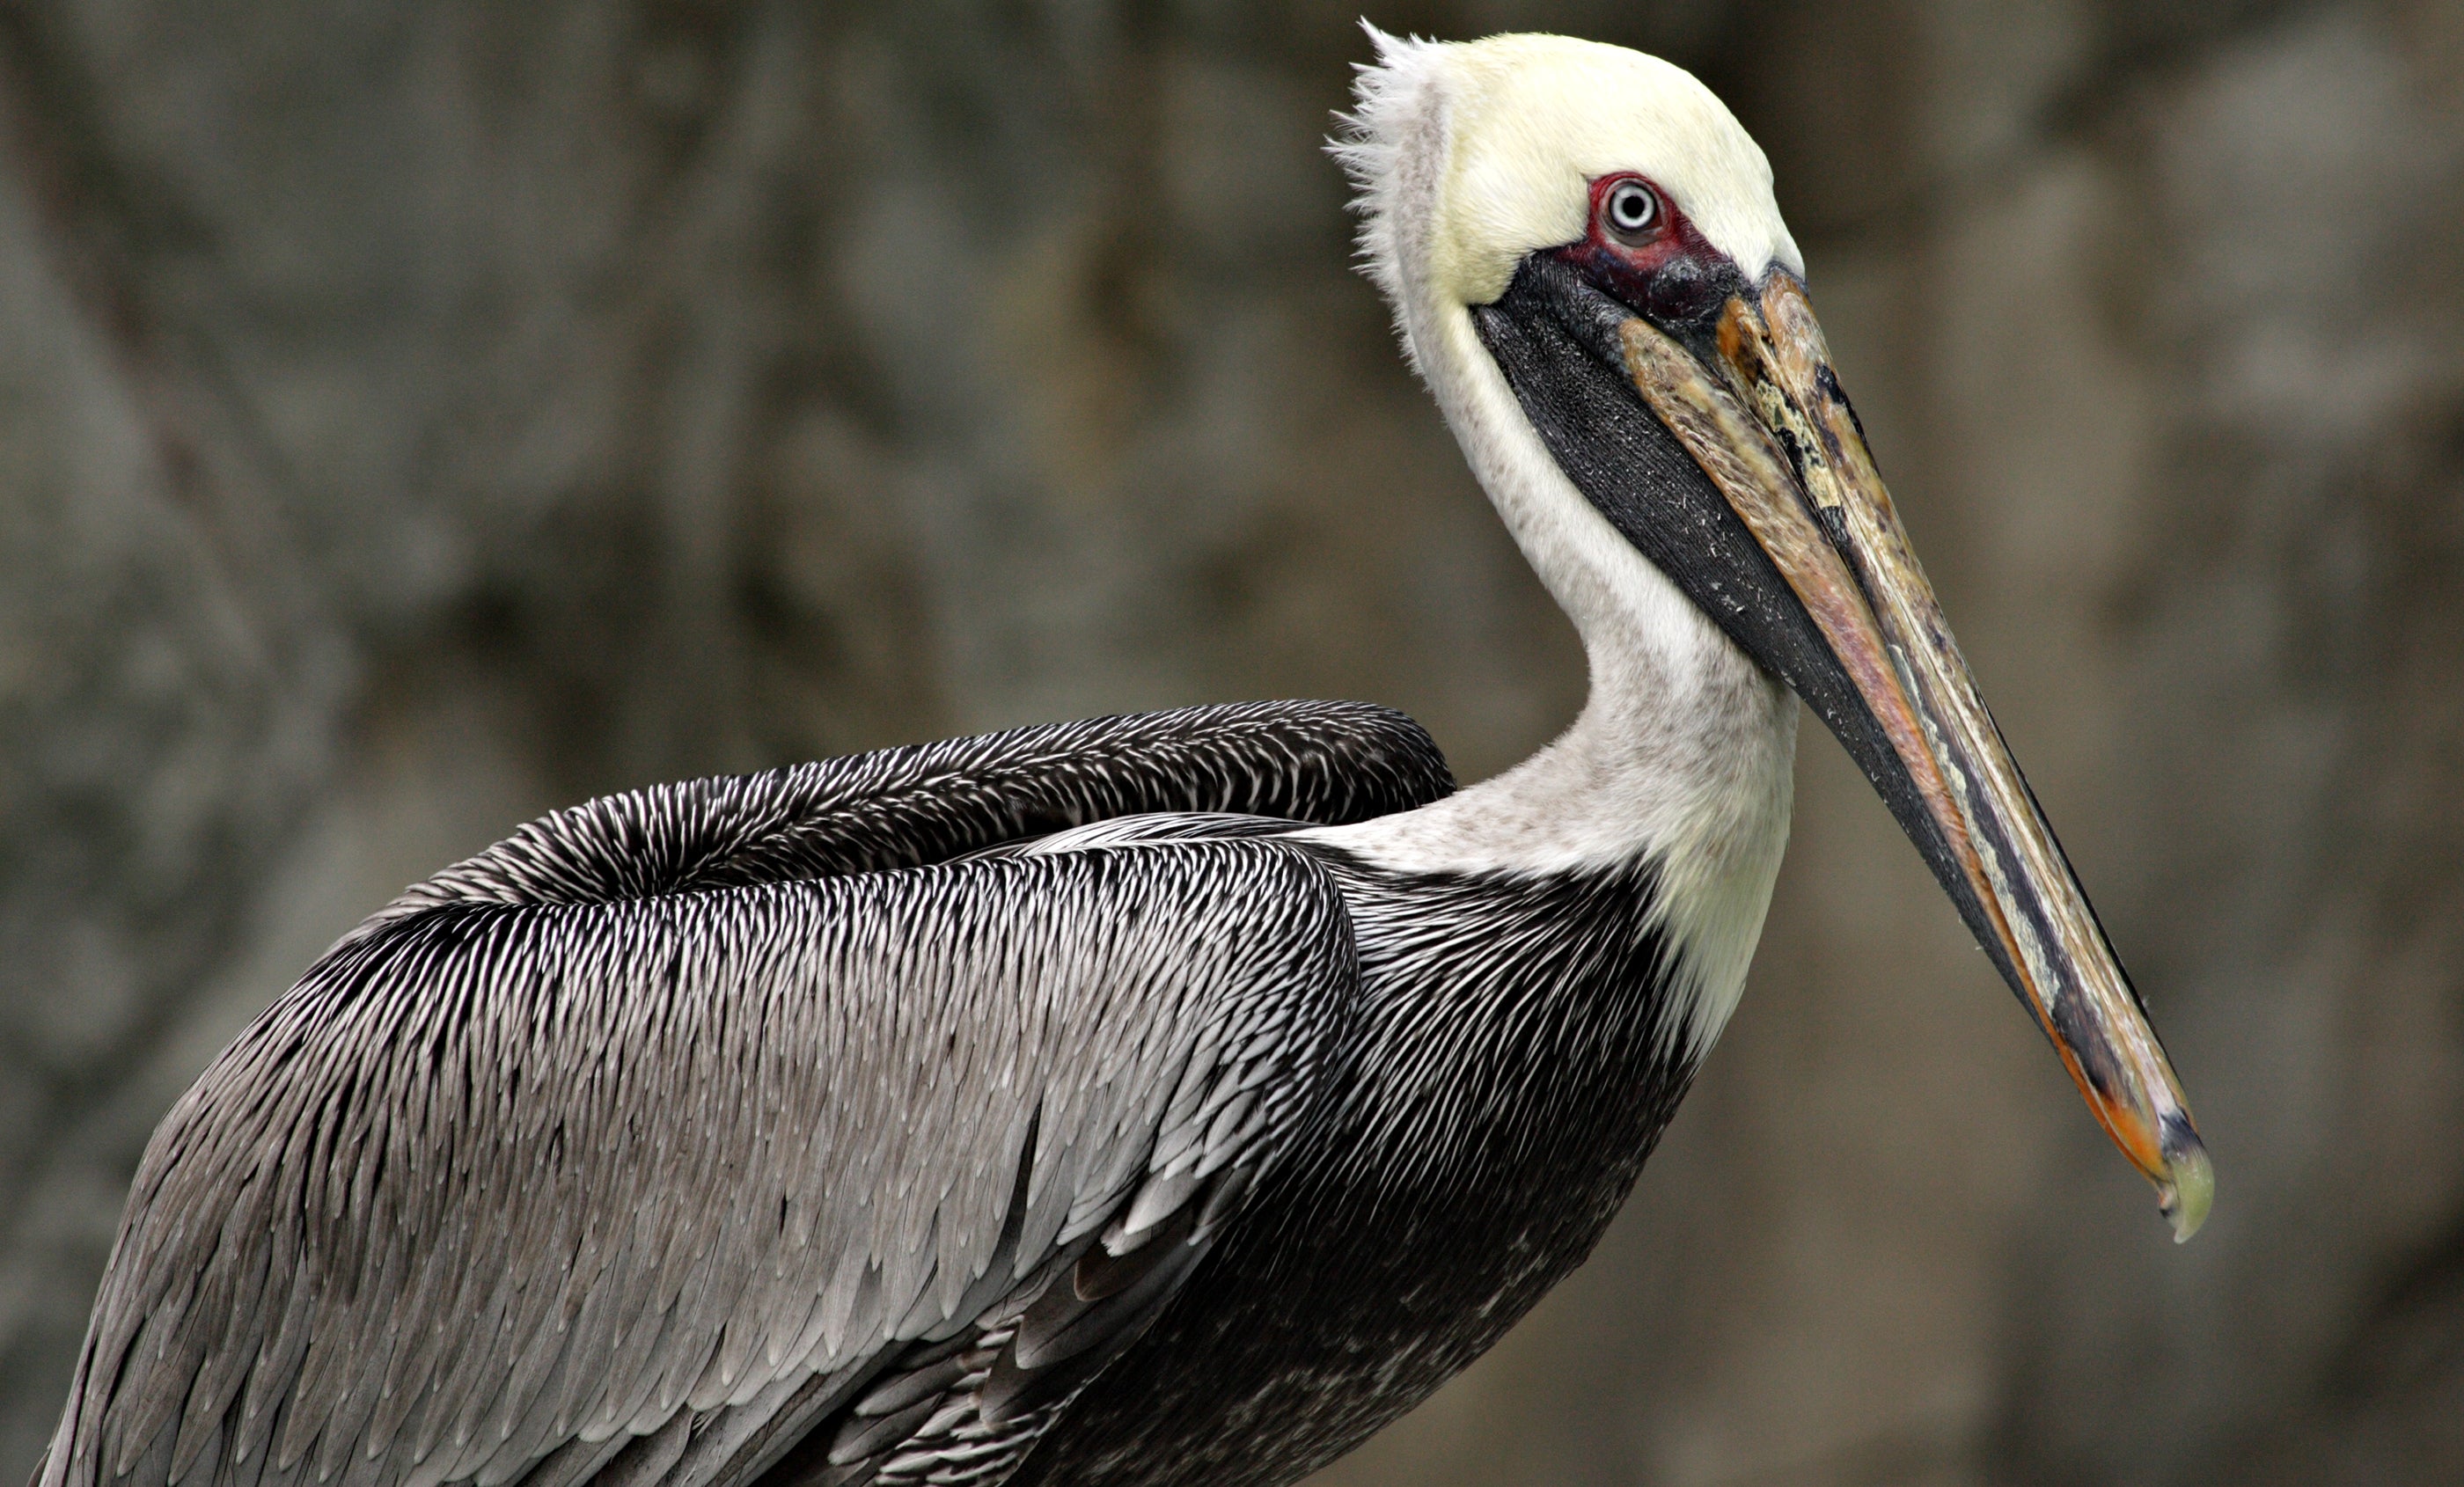 A brown pelican with a gray-brown body, white head and neck, and long bill